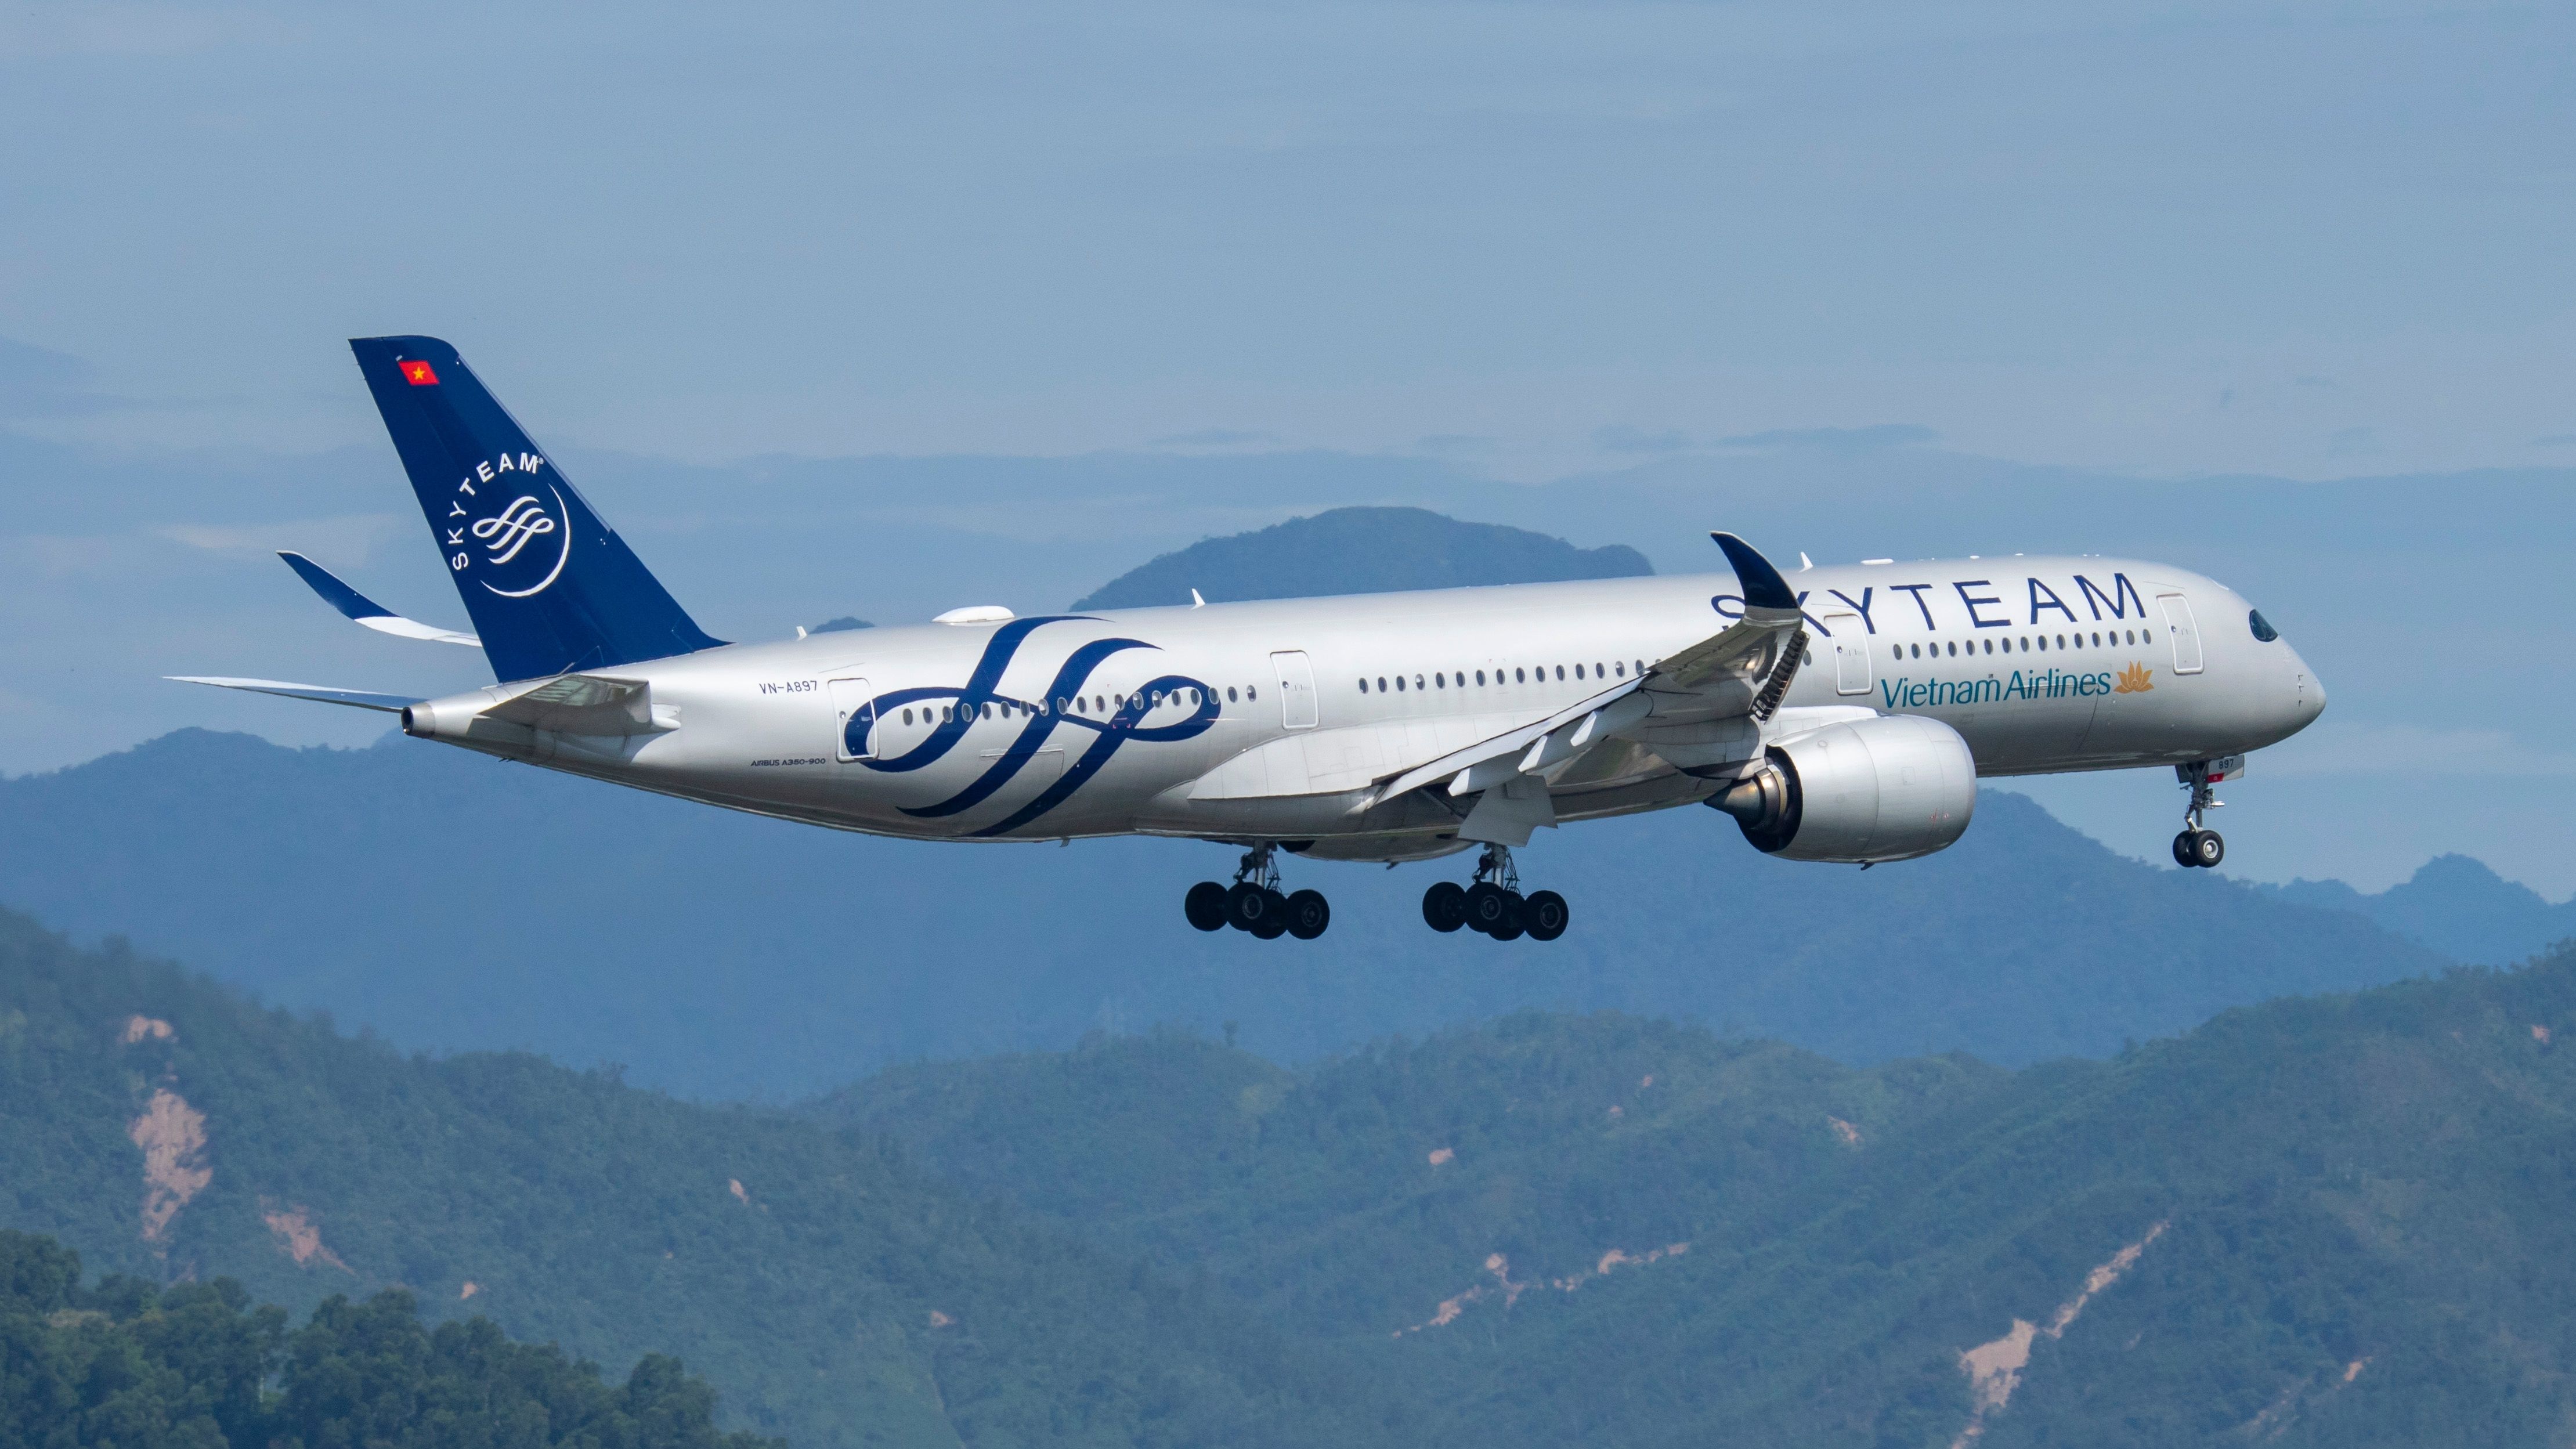 A Vietnam Airlines Airbus A350 in SkyTeam Livery flying in the sky.